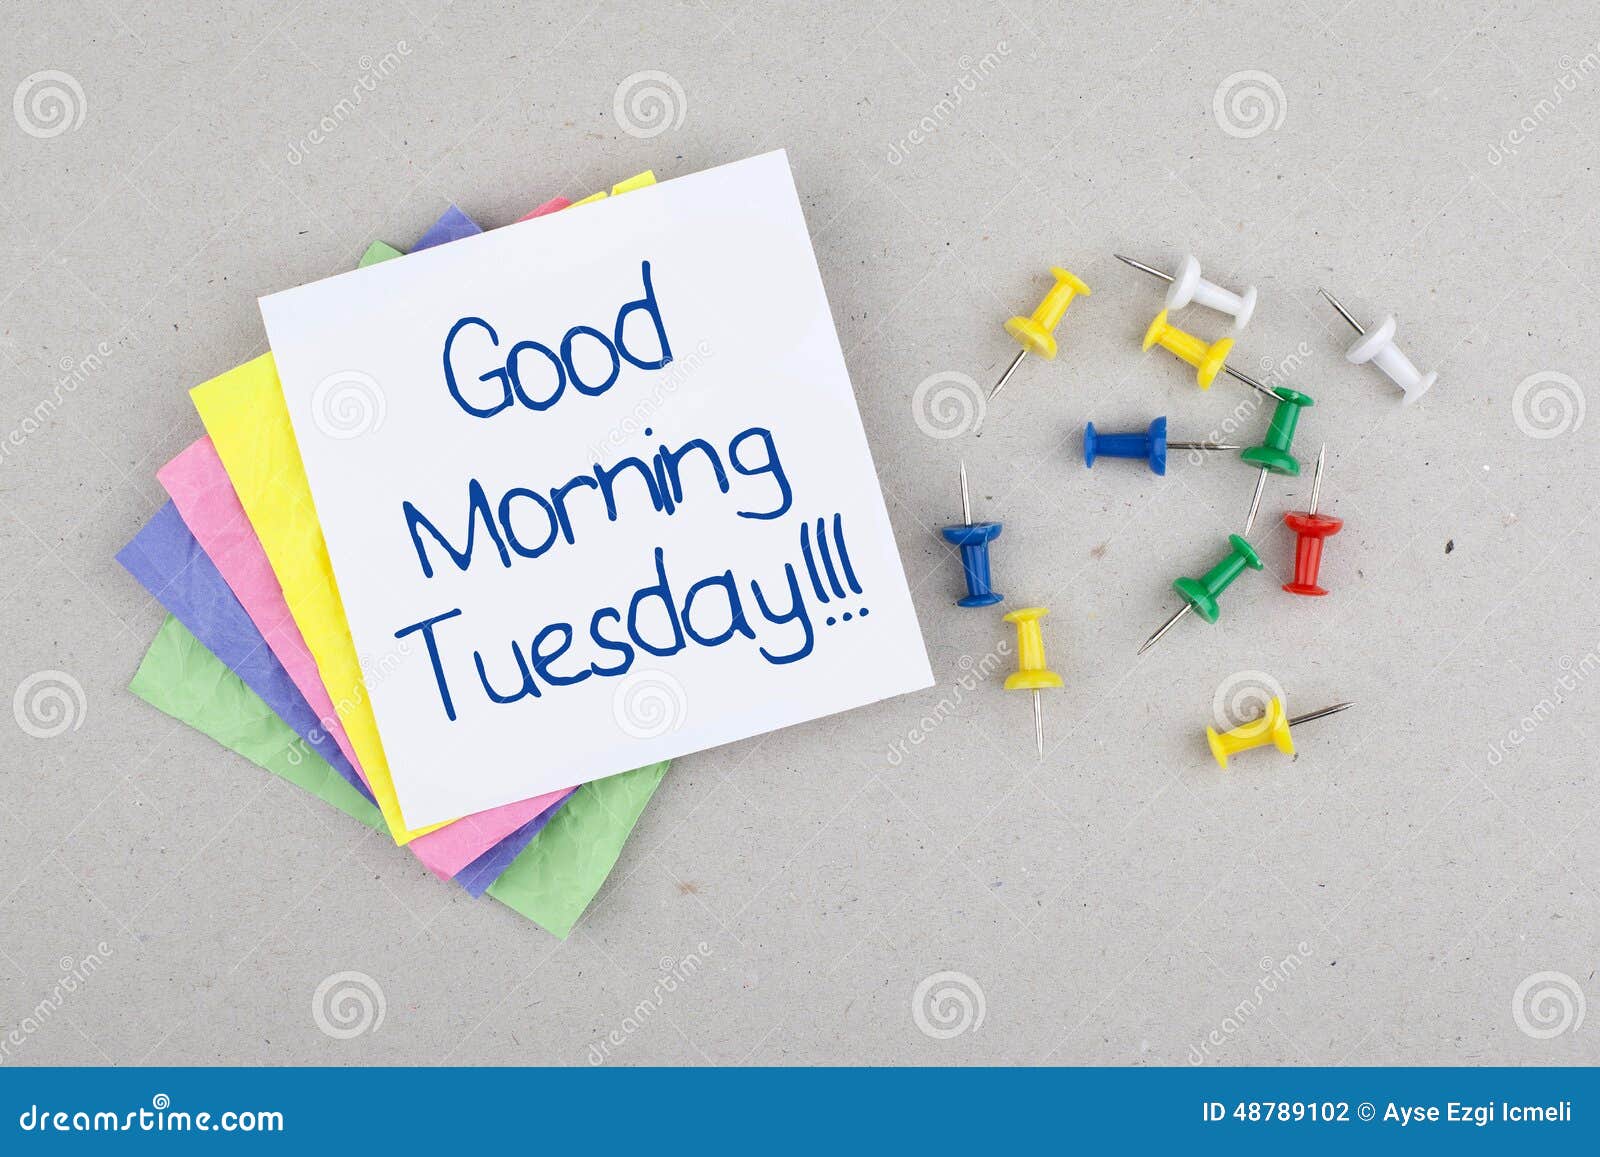 Good Morning Tuesday Note stock photo. Image of days - 48789102